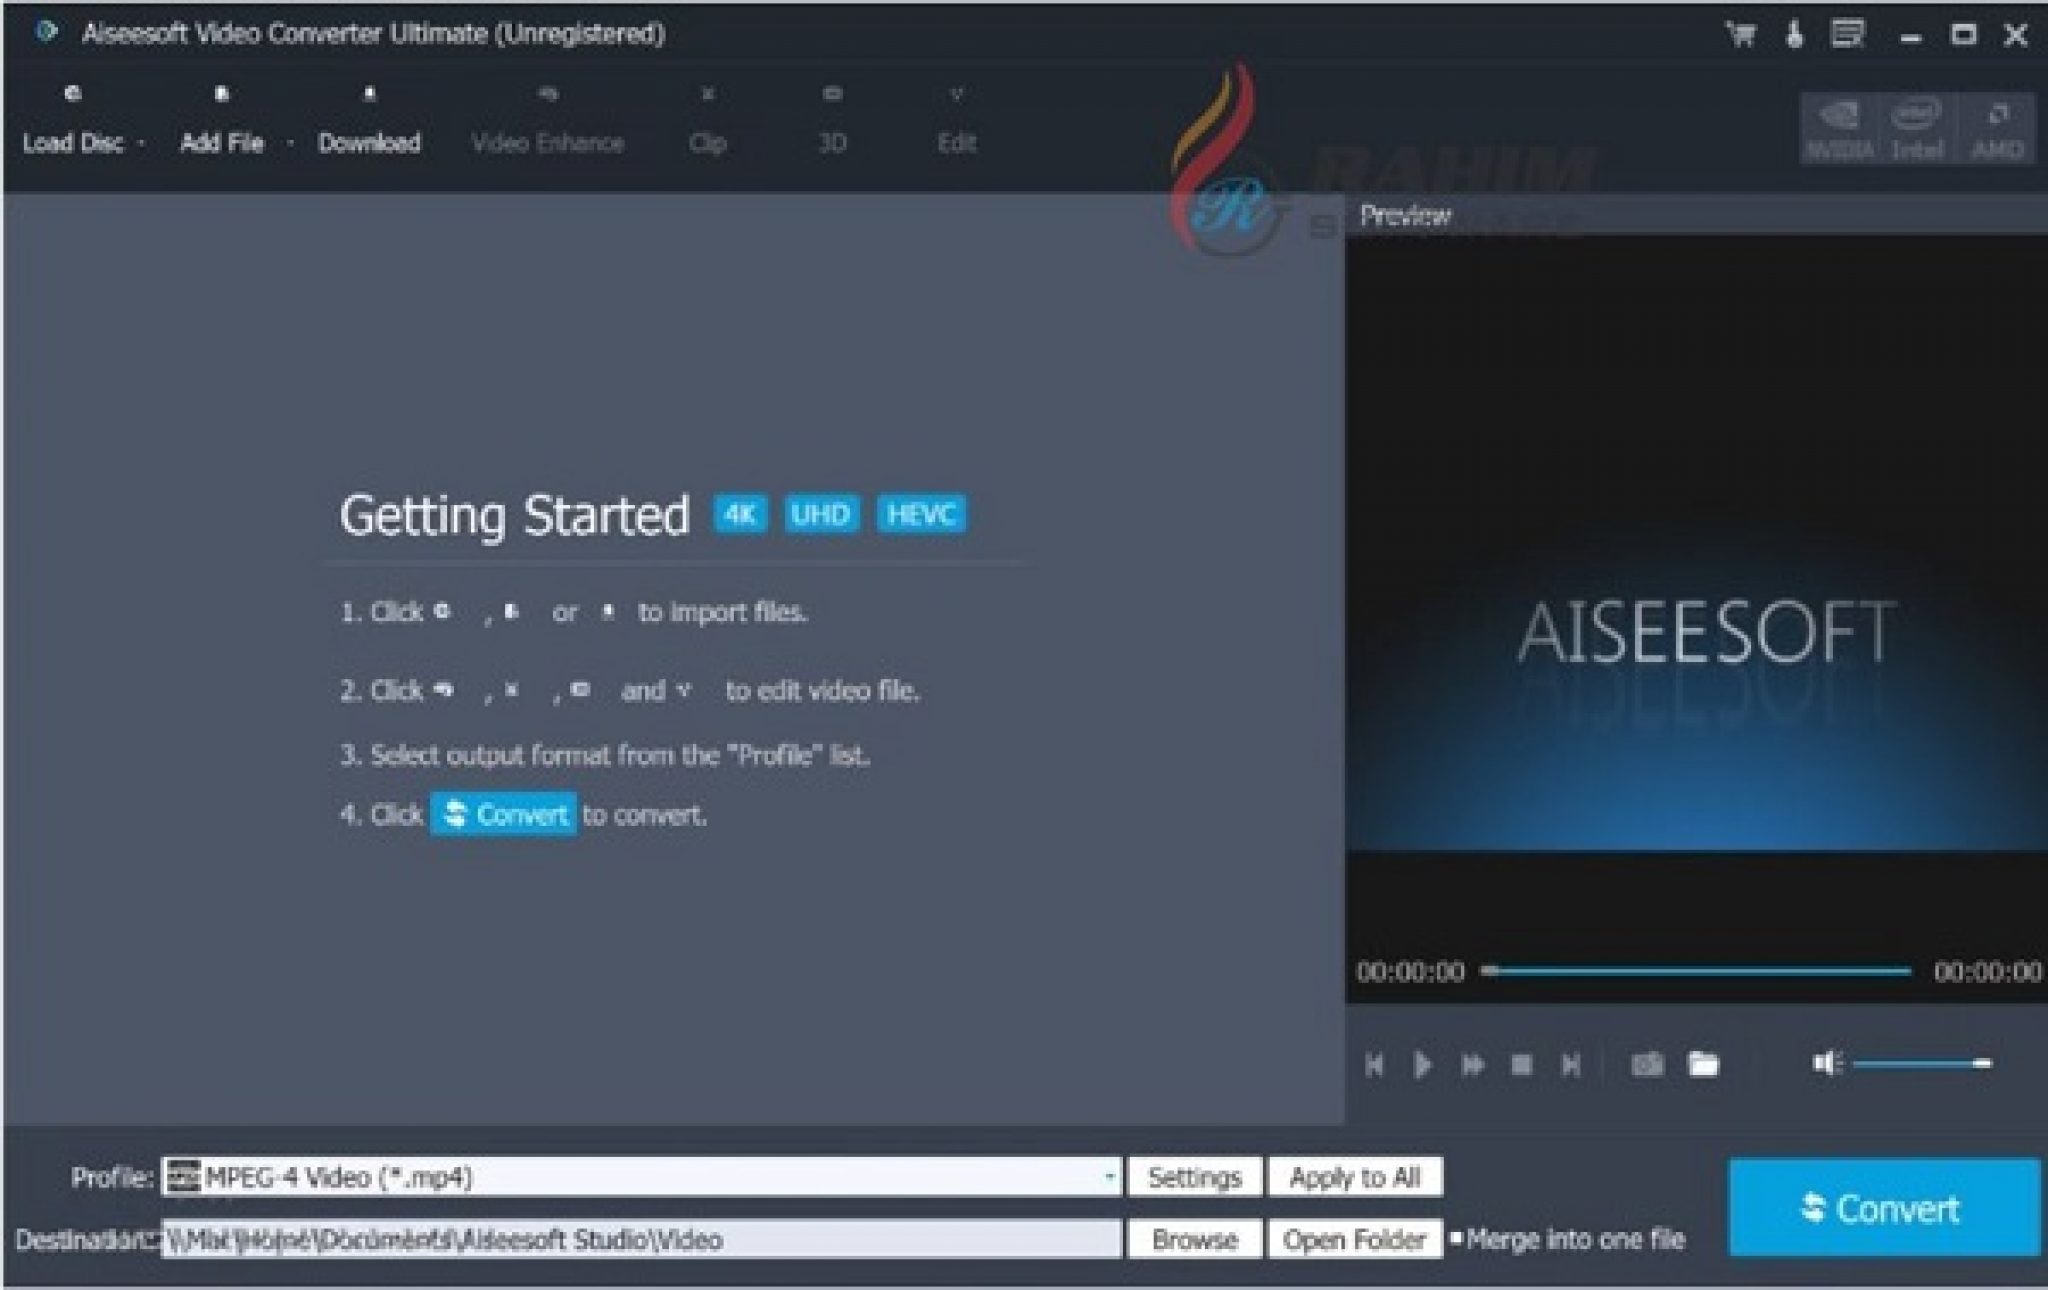 download aiseesoft video converter ultimate